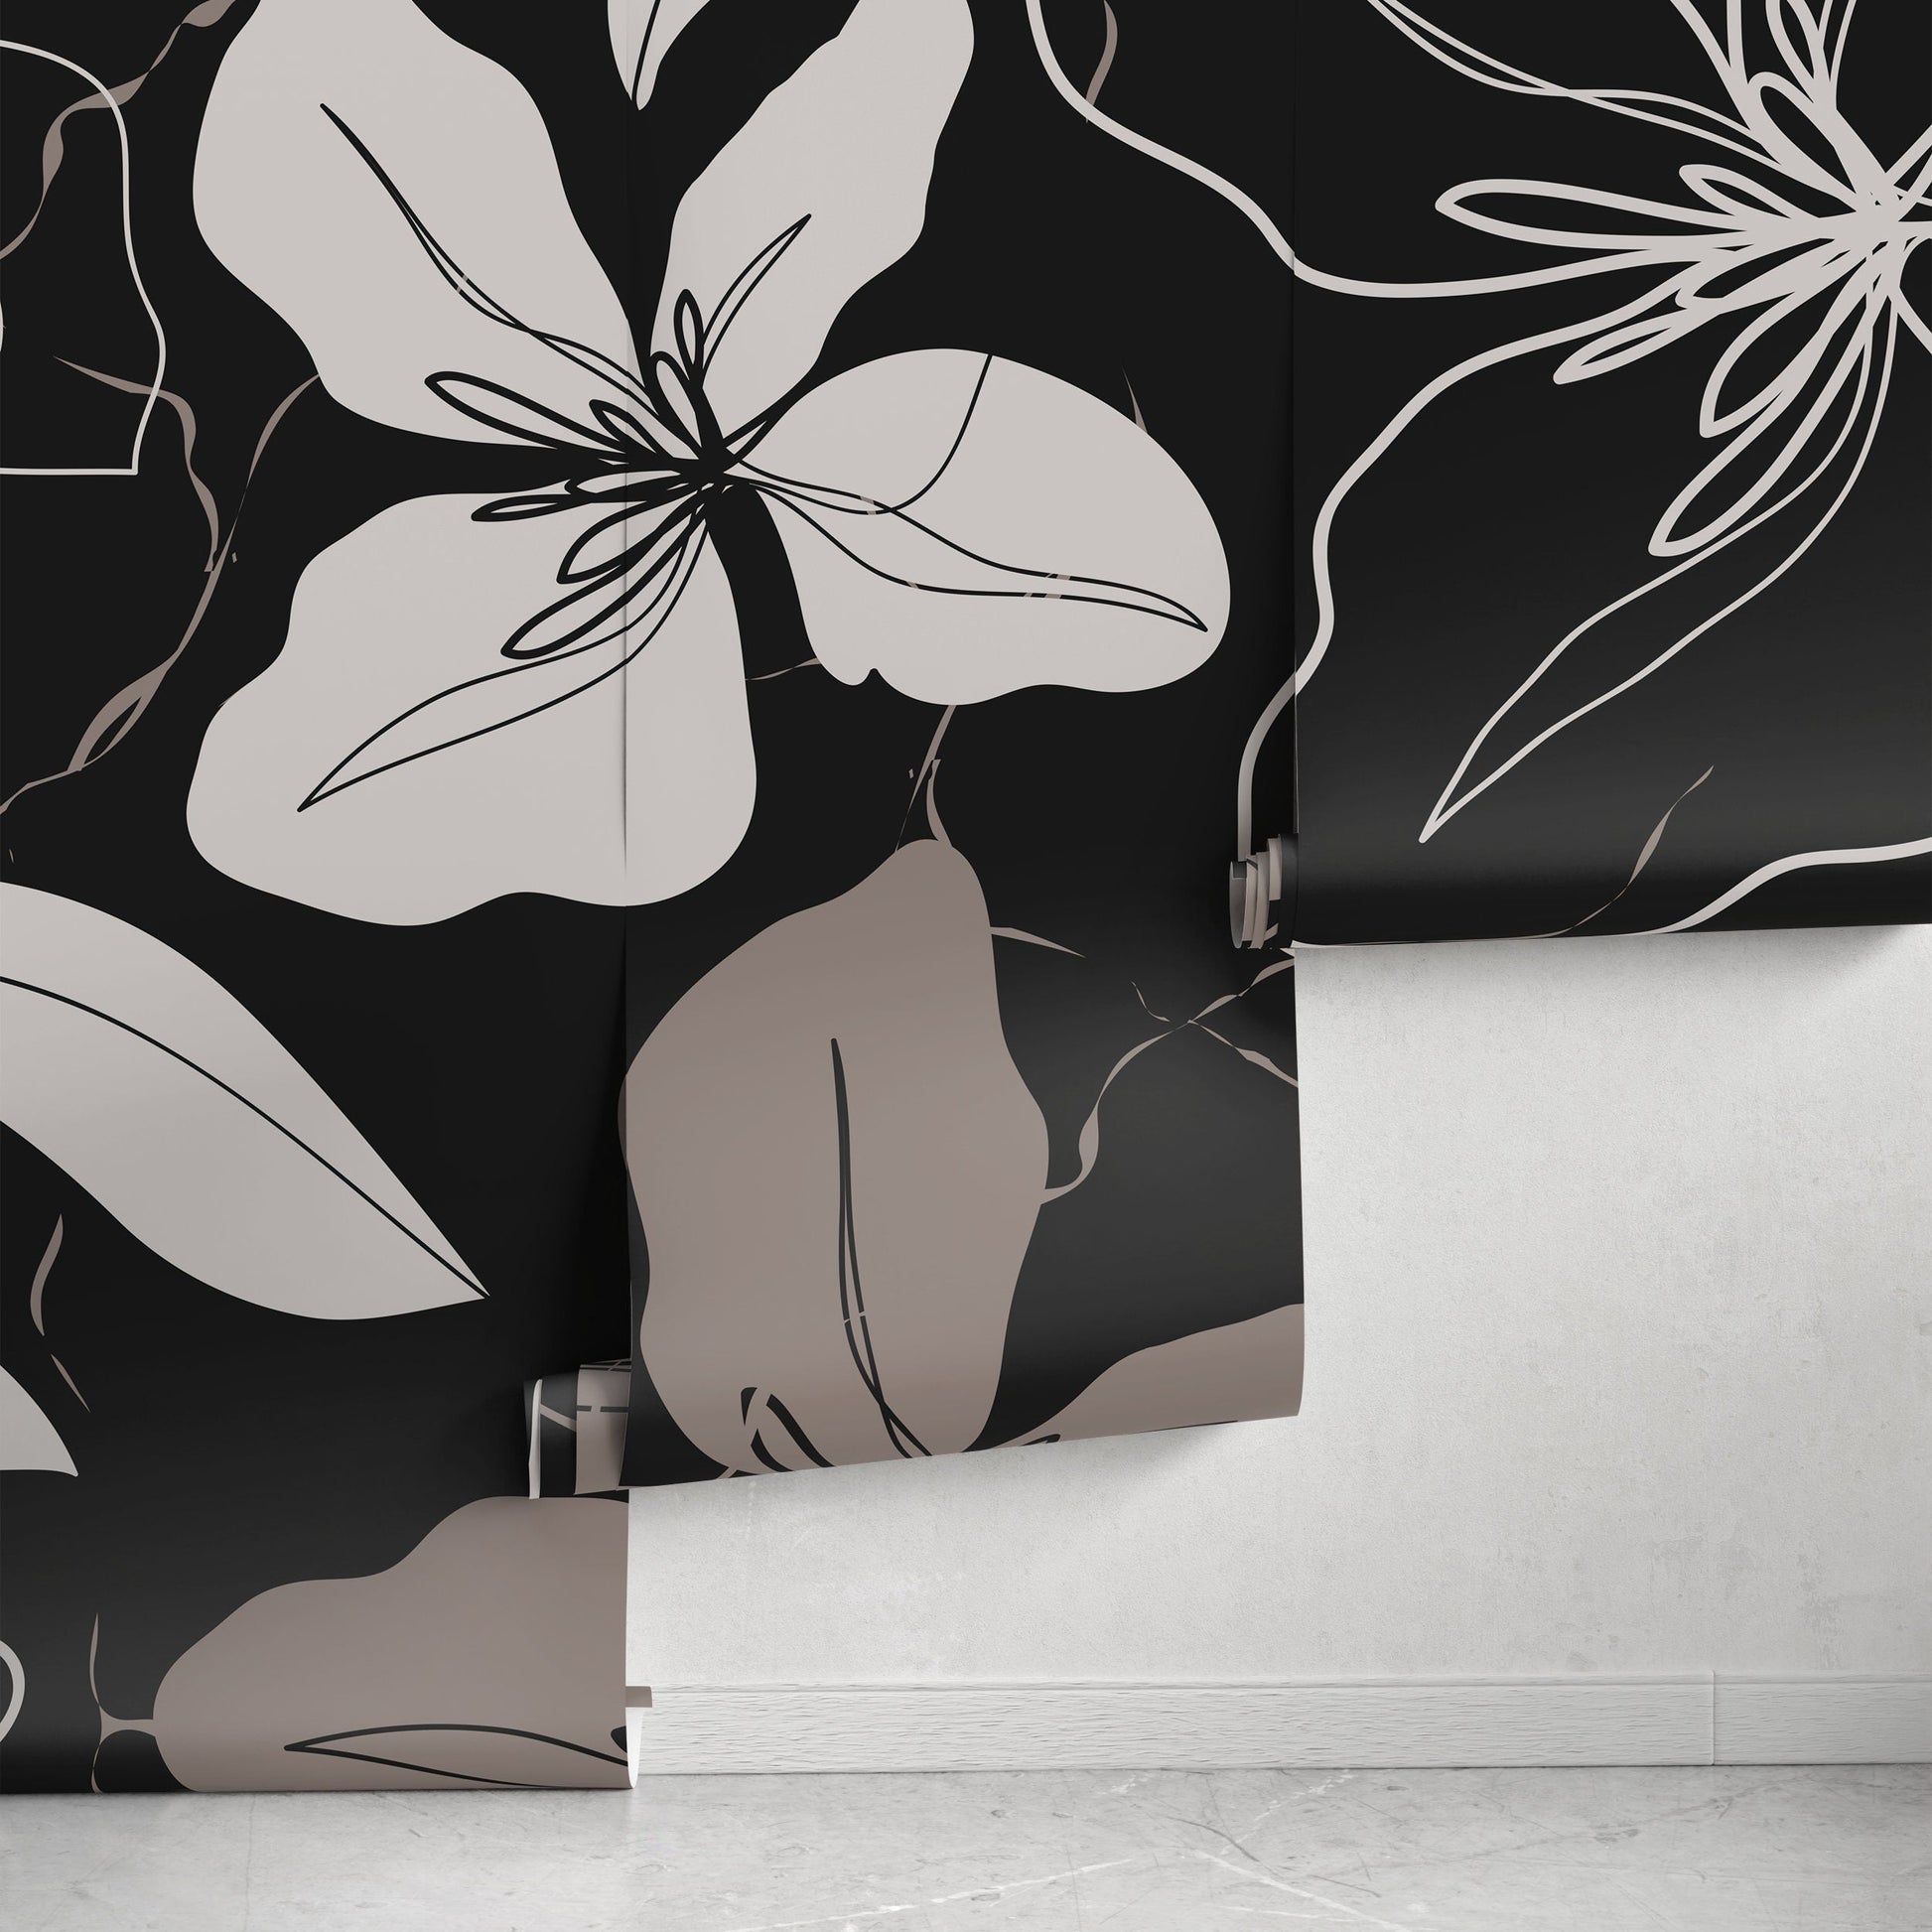 Abstract Floral Mural Wallpaper Peel and Stick and Traditional Wallpaper - C050